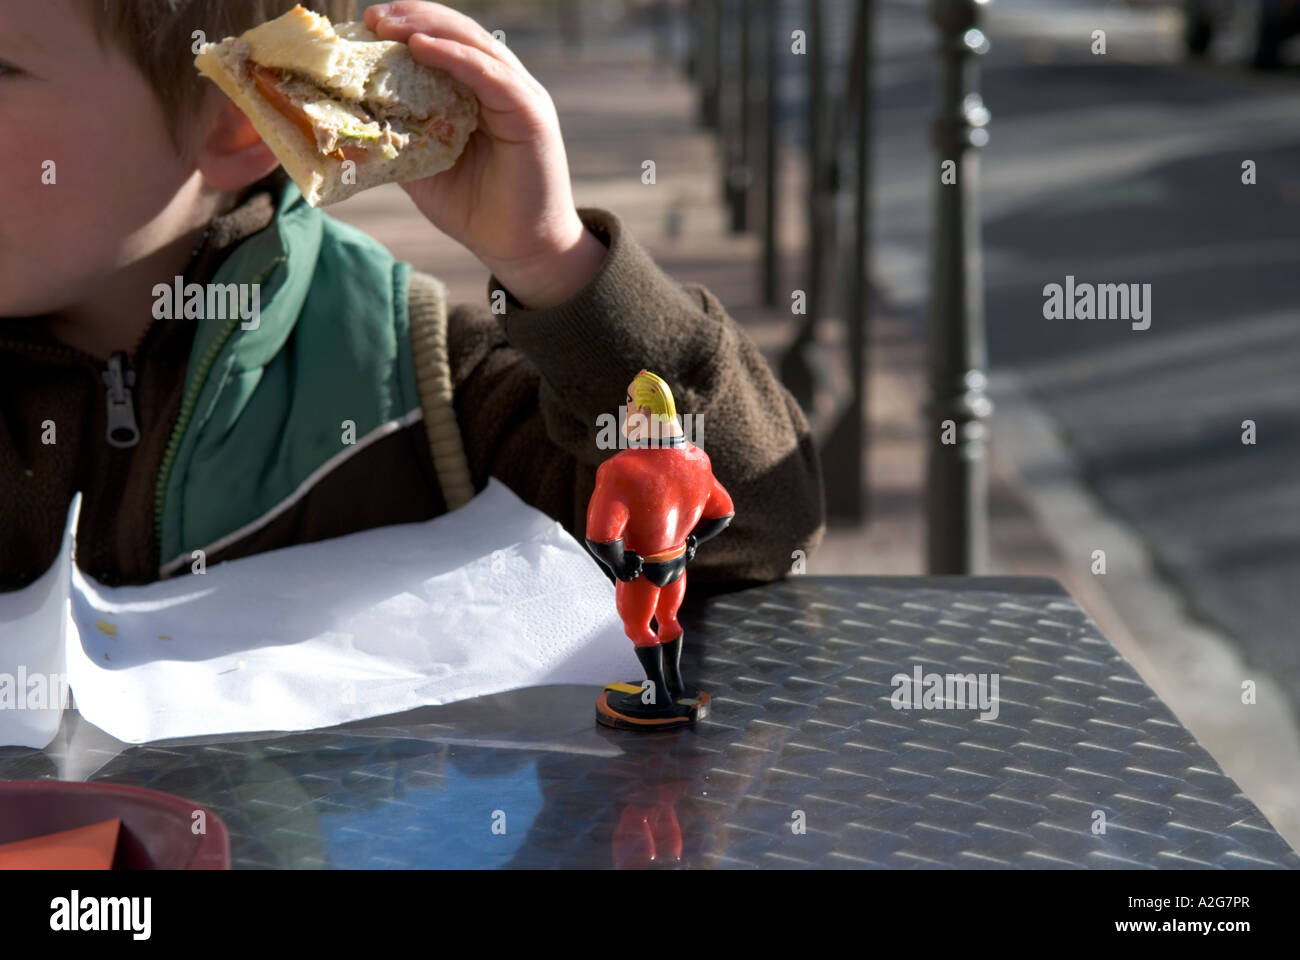 335 a small toy model of mr incredible stands on a cafe table looking at a young boy eating his sandwich Stock Photo